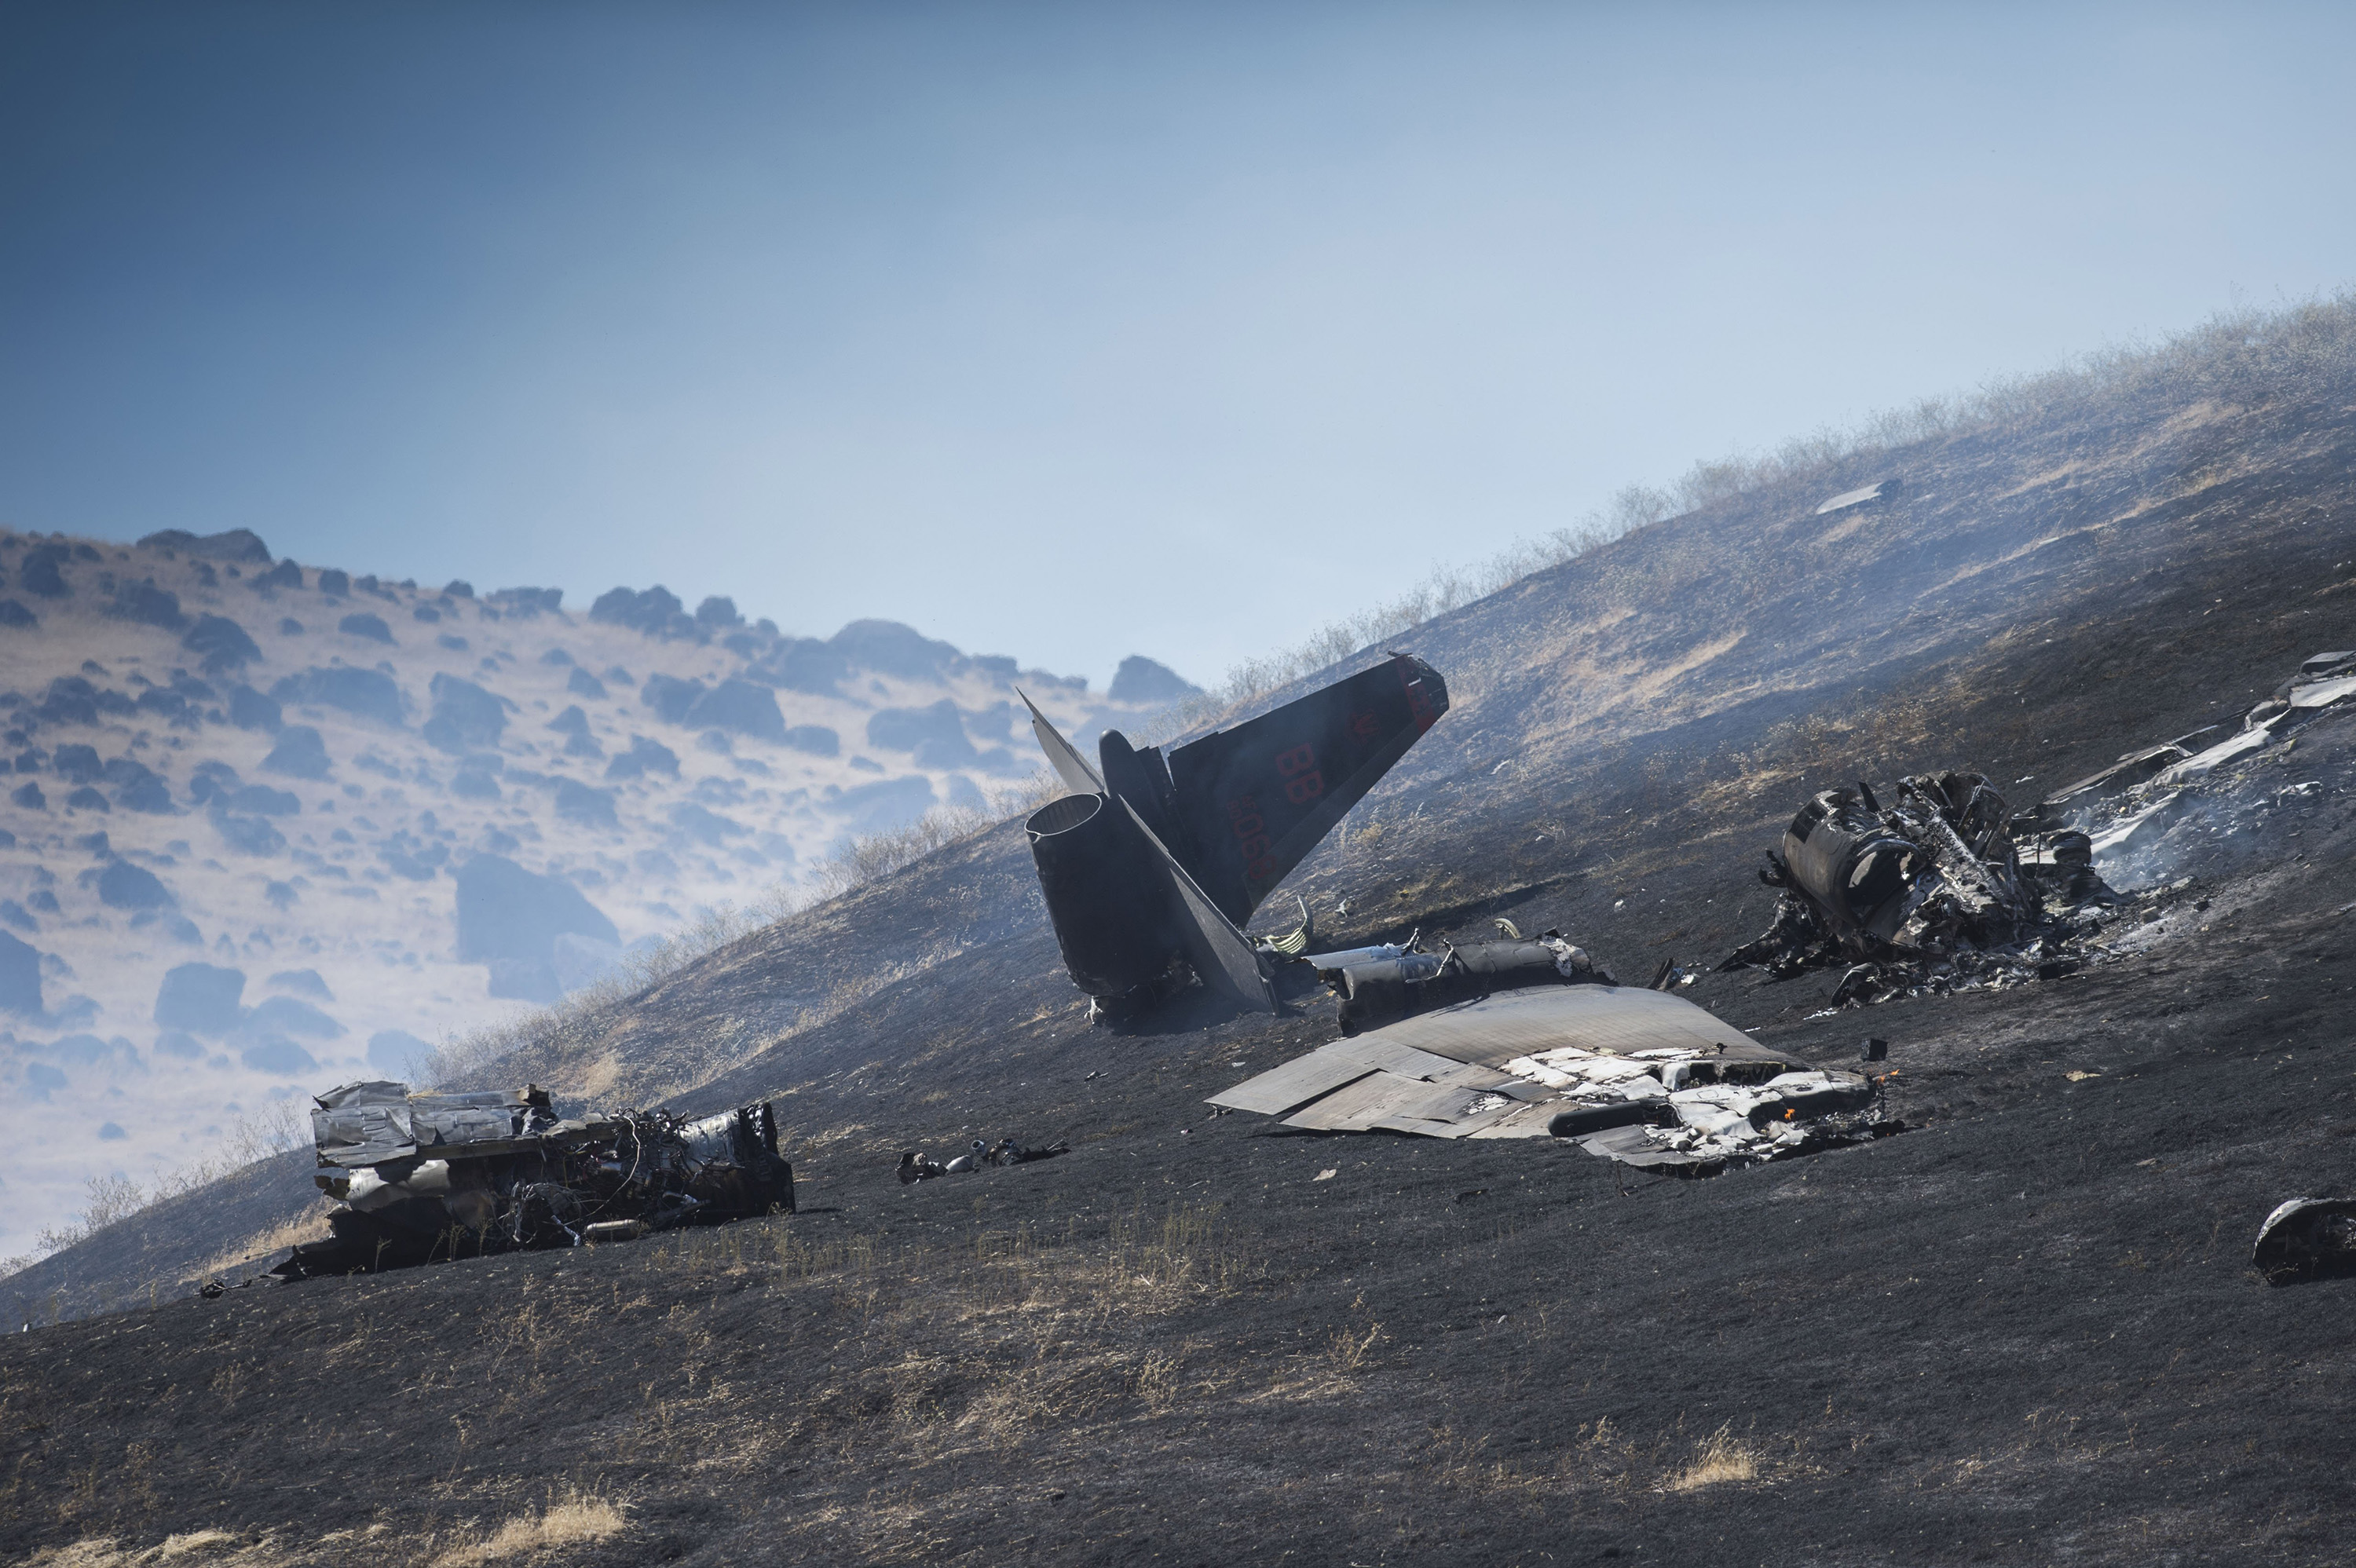 Pilots eject from U-2 spy plane as it crashes in remote Northern California terrain